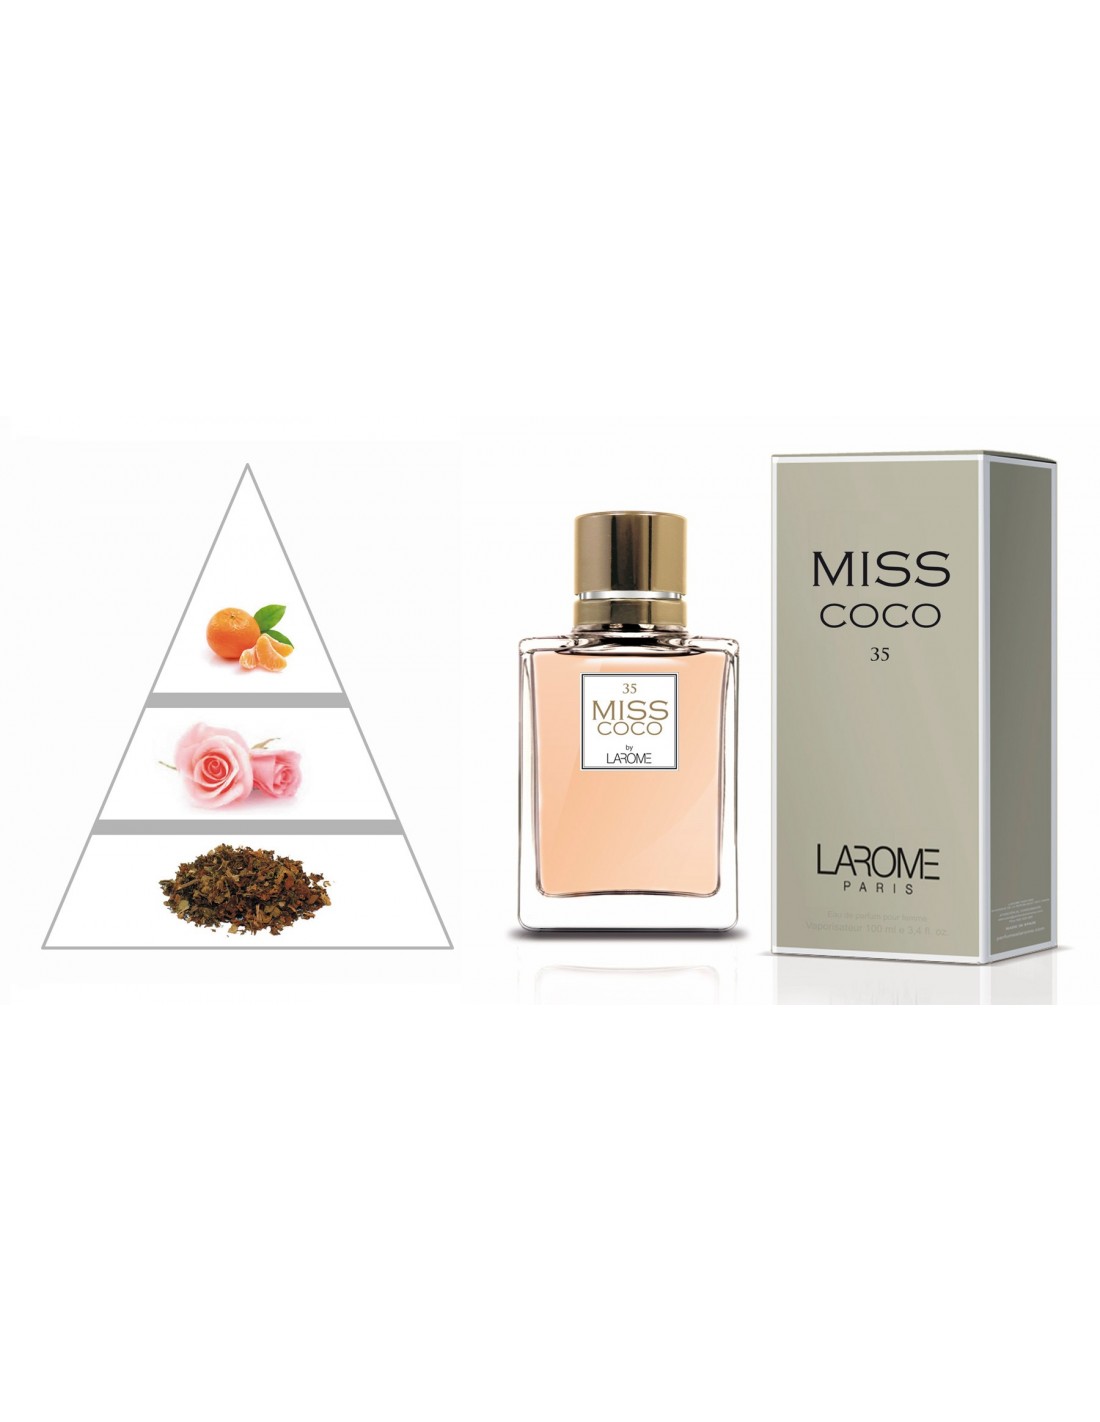 ▷ MISS COCO by LAROME ✶ Perfume for women Size 100ml